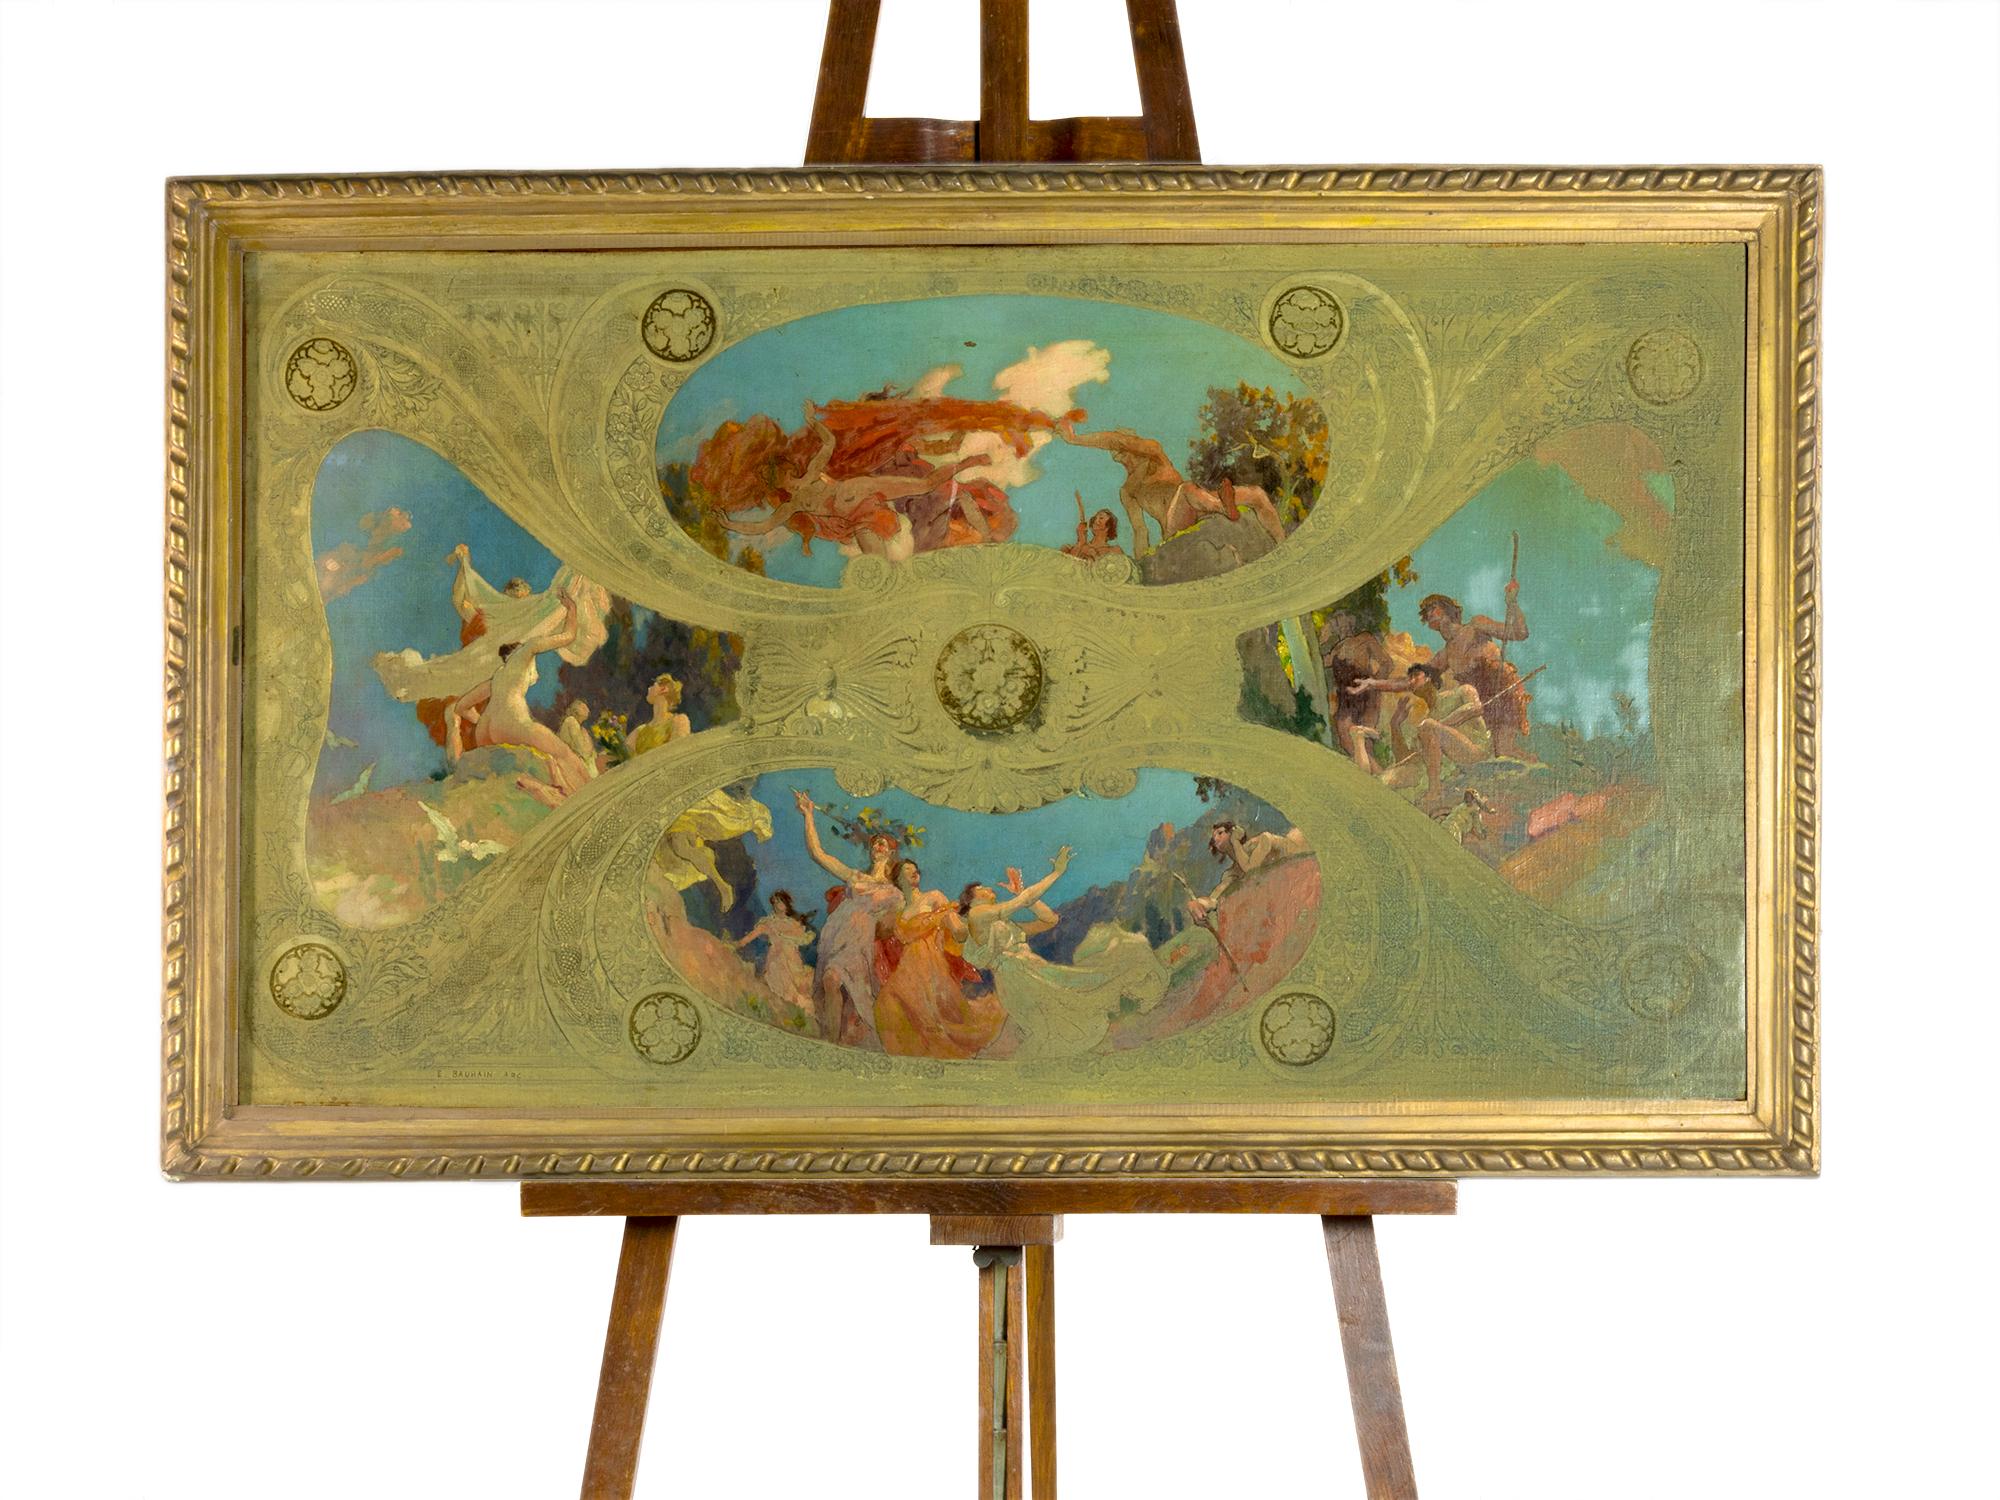 The oil painting fresco ceiling study was created for French churches by Edouard Bauhain, the architect responsible for the Art Nouveau and Art Deco transition and the designer of numerous French palaces and churches throughout the country. The